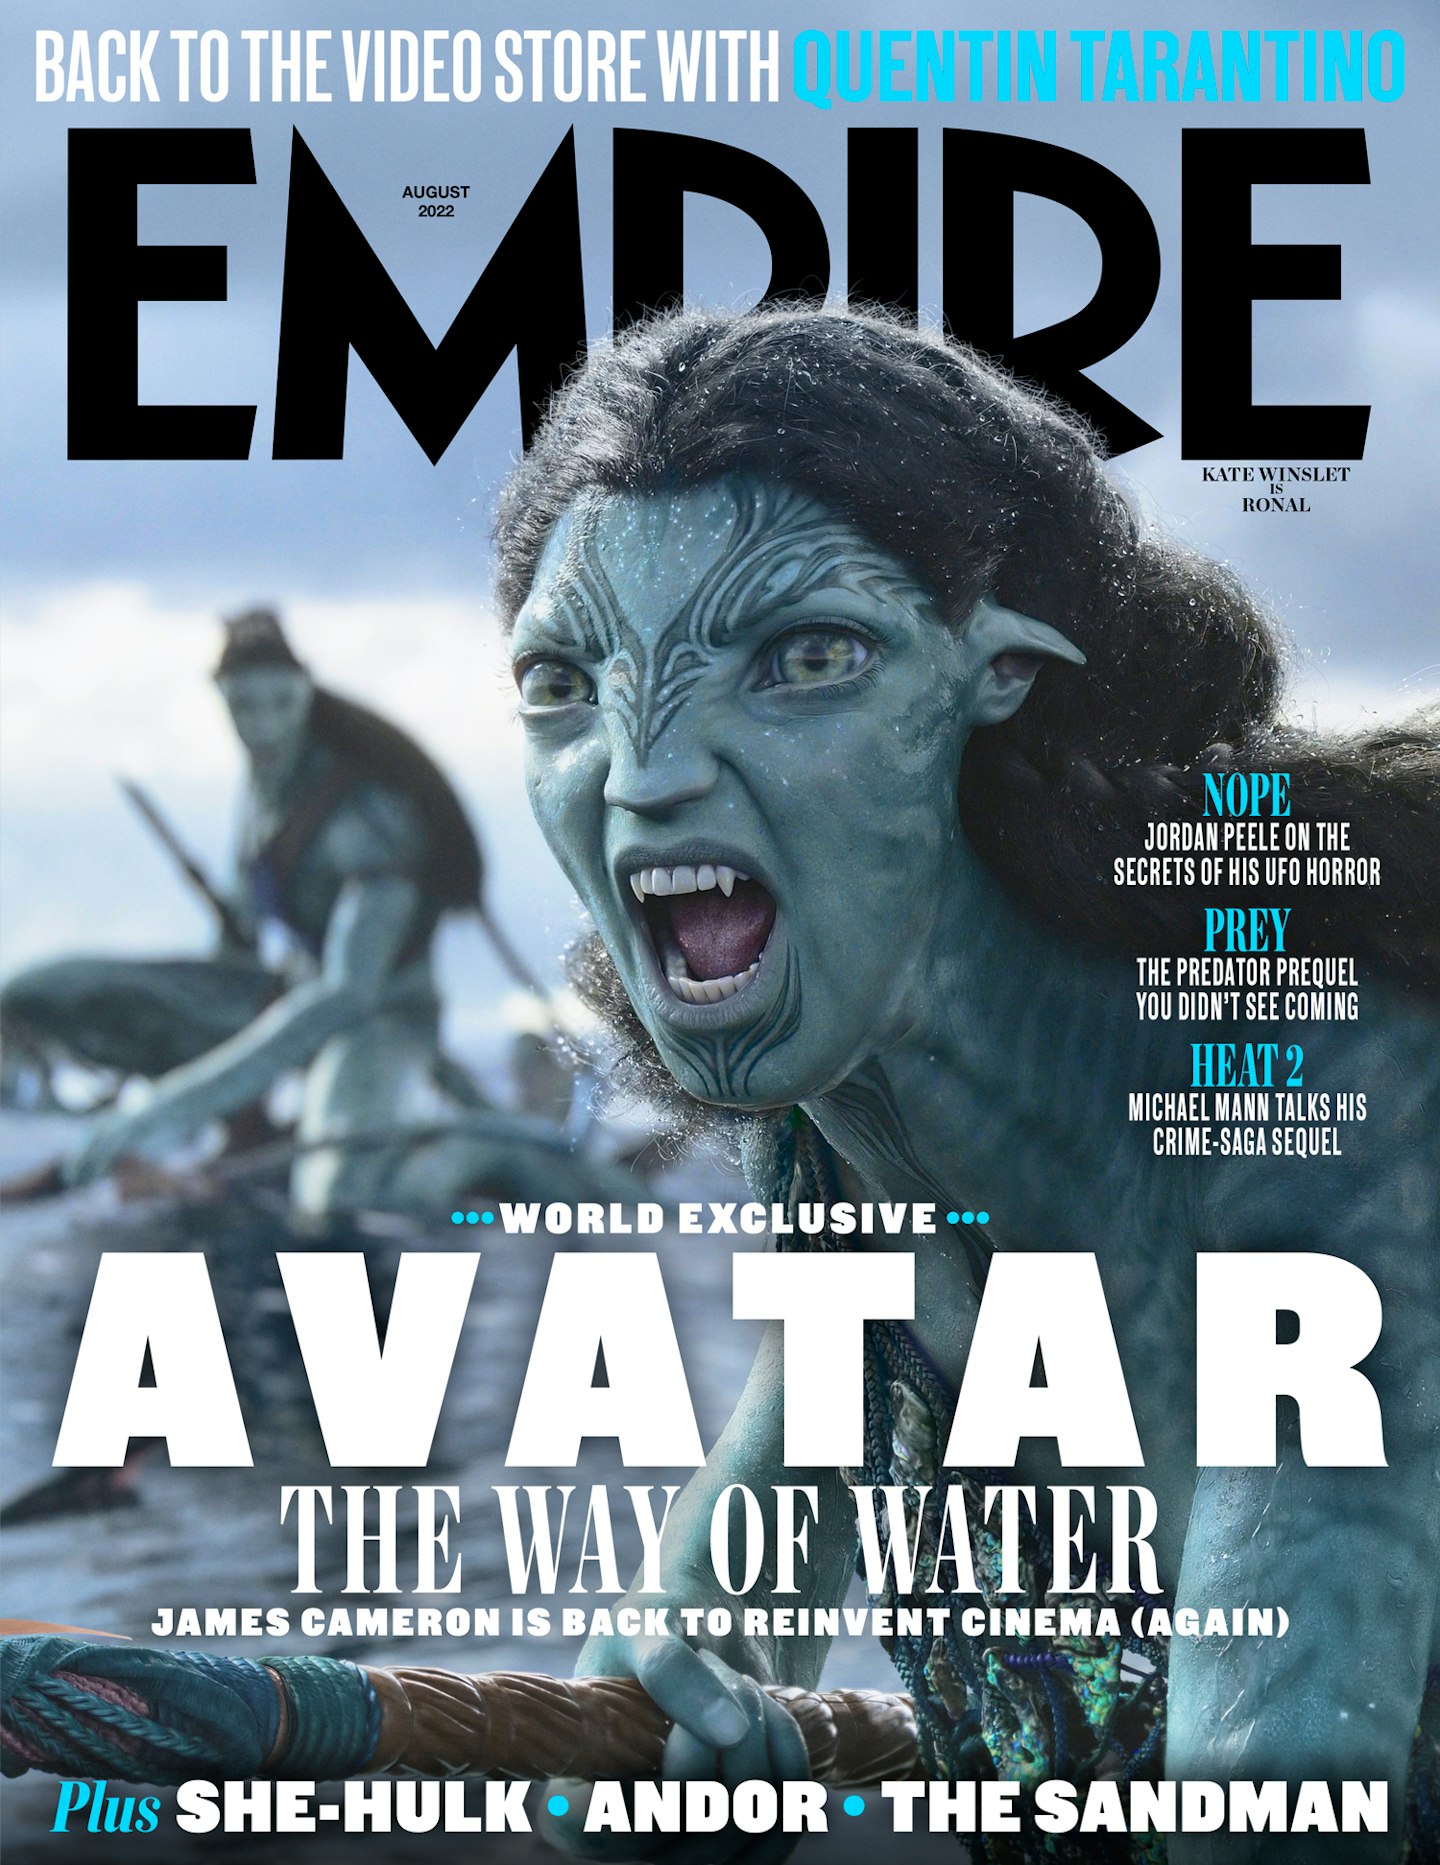 Empire August 2022 Newsstand Cover